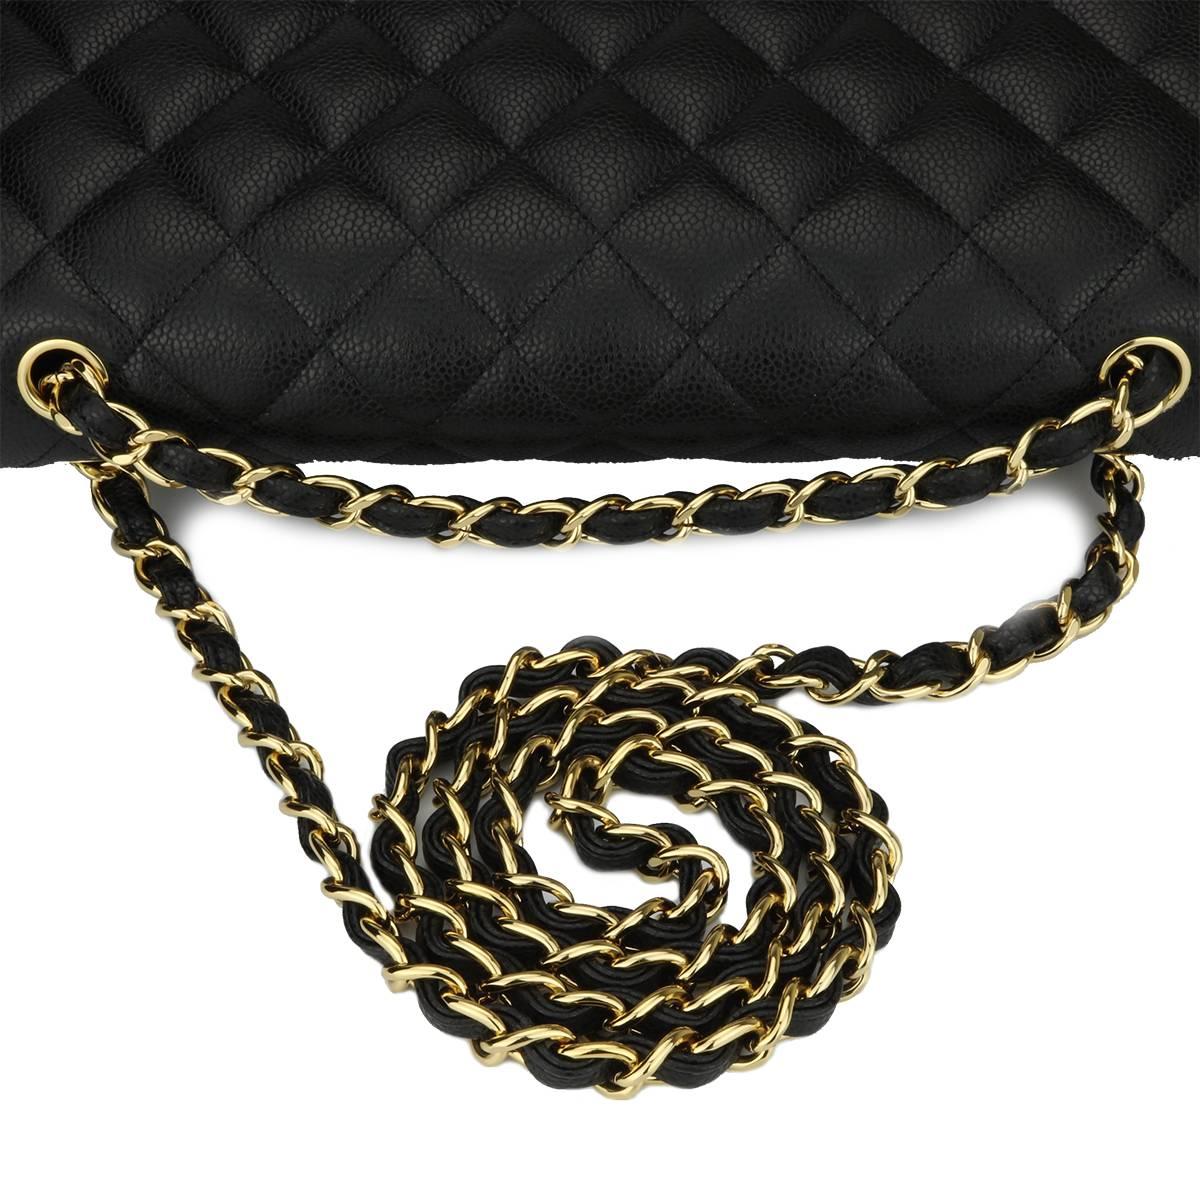  CHANEL Classic Jumbo Double Flap Black Caviar with Gold Hardware 2014 7